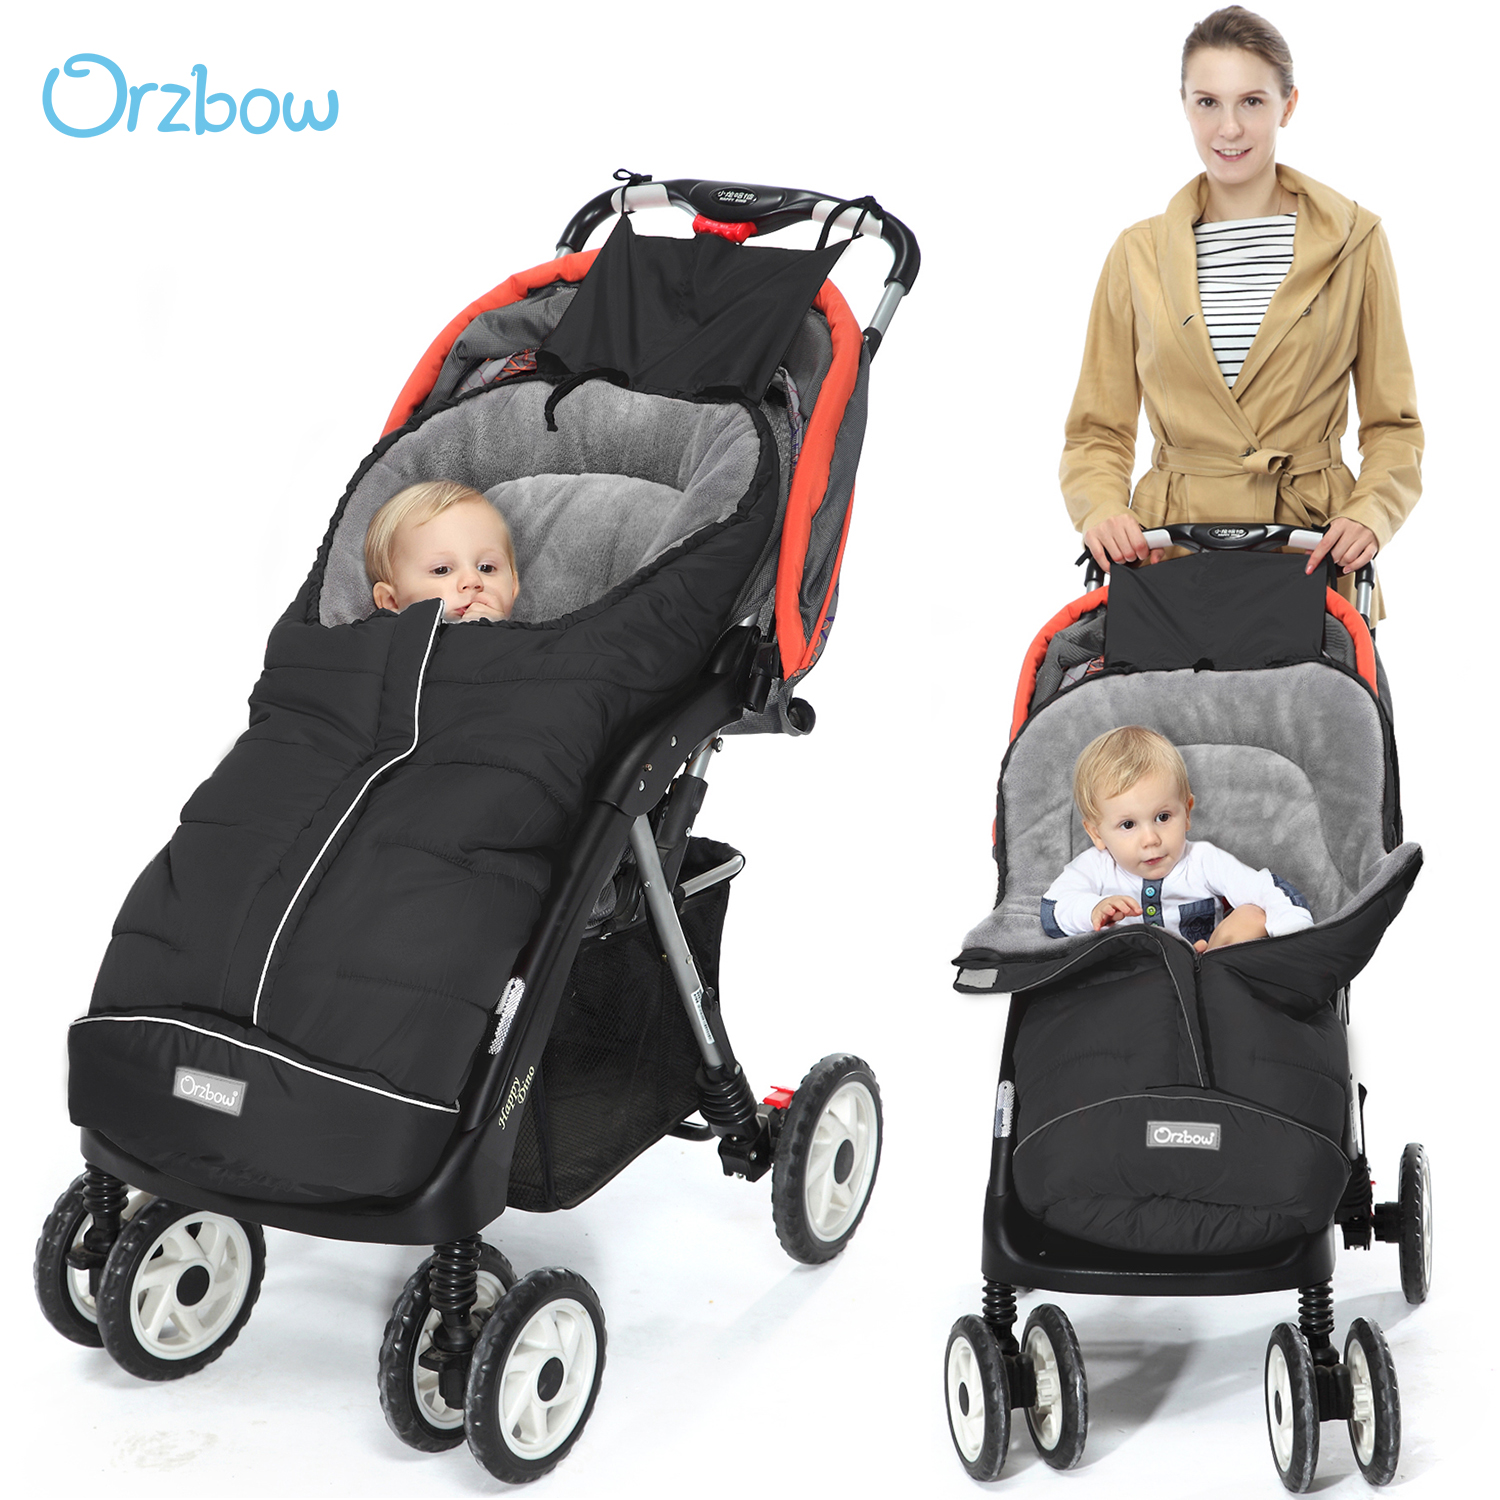 Orzbow Canopy Style Bunting Bag to Protect Baby from Cold and Winter Weather in Car Seats and Strollers Dark Grey Blackout Infant 